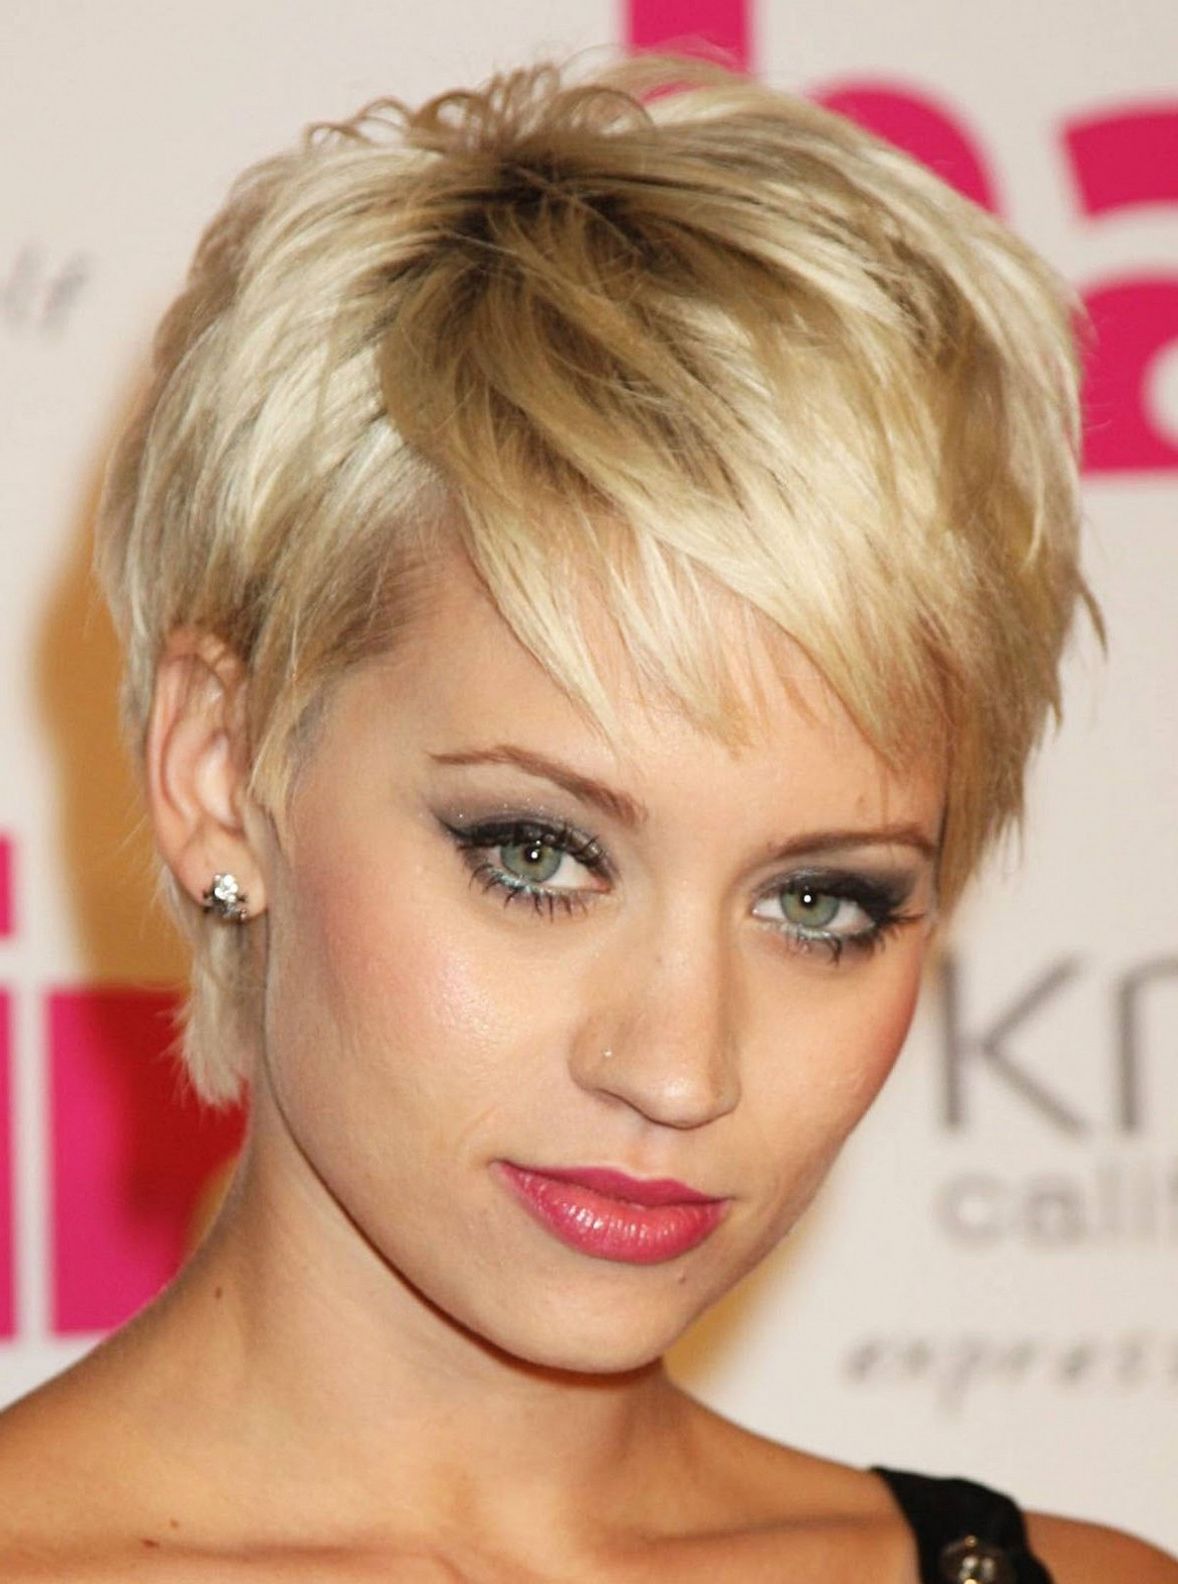 Short Hairstyles To Make You Look Younger Unique Hairstyles Top 5 Inside Short Haircuts To Make You Look Younger (View 12 of 25)